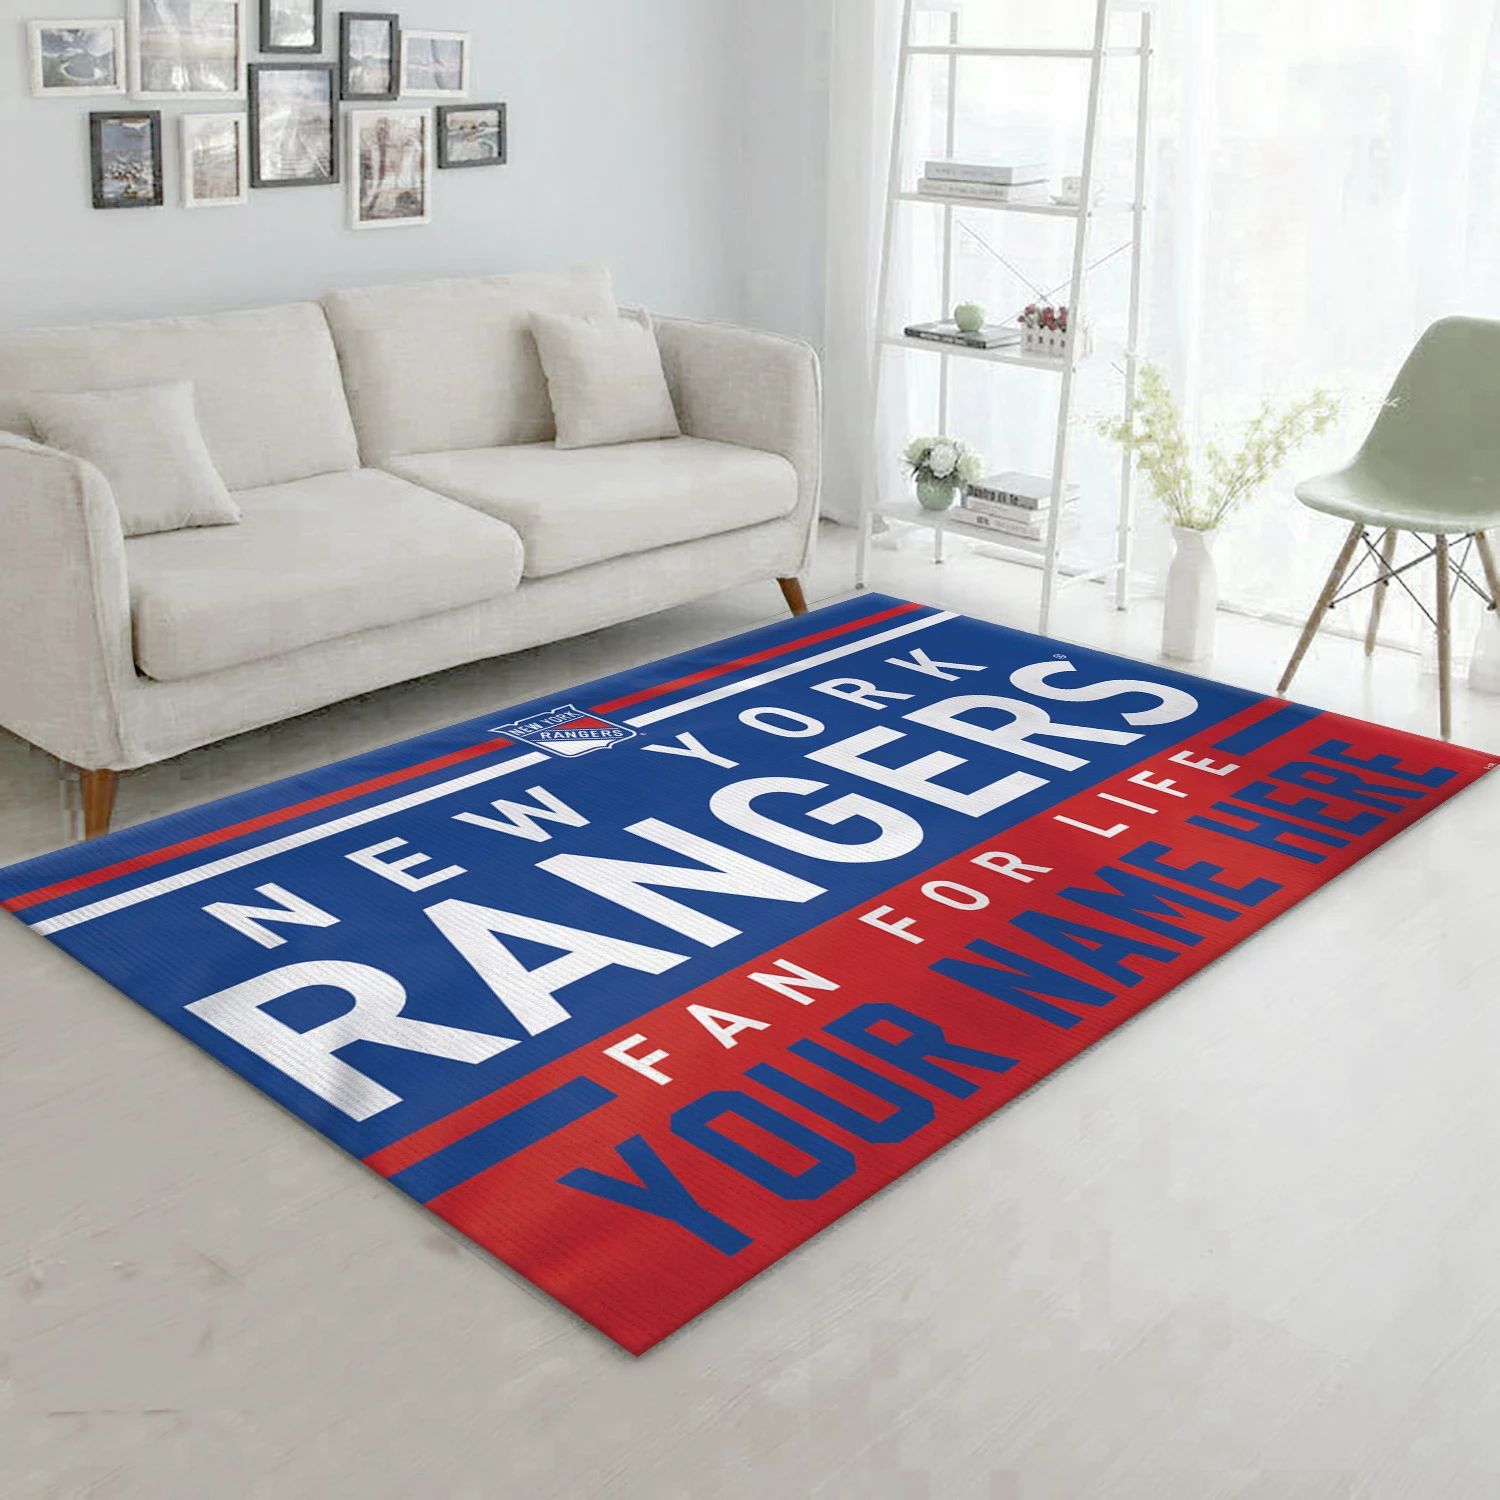 New York Rangers Personal NHL Area Rug Carpet, Sport Living Room Rug - Home Decor - Indoor Outdoor Rugs